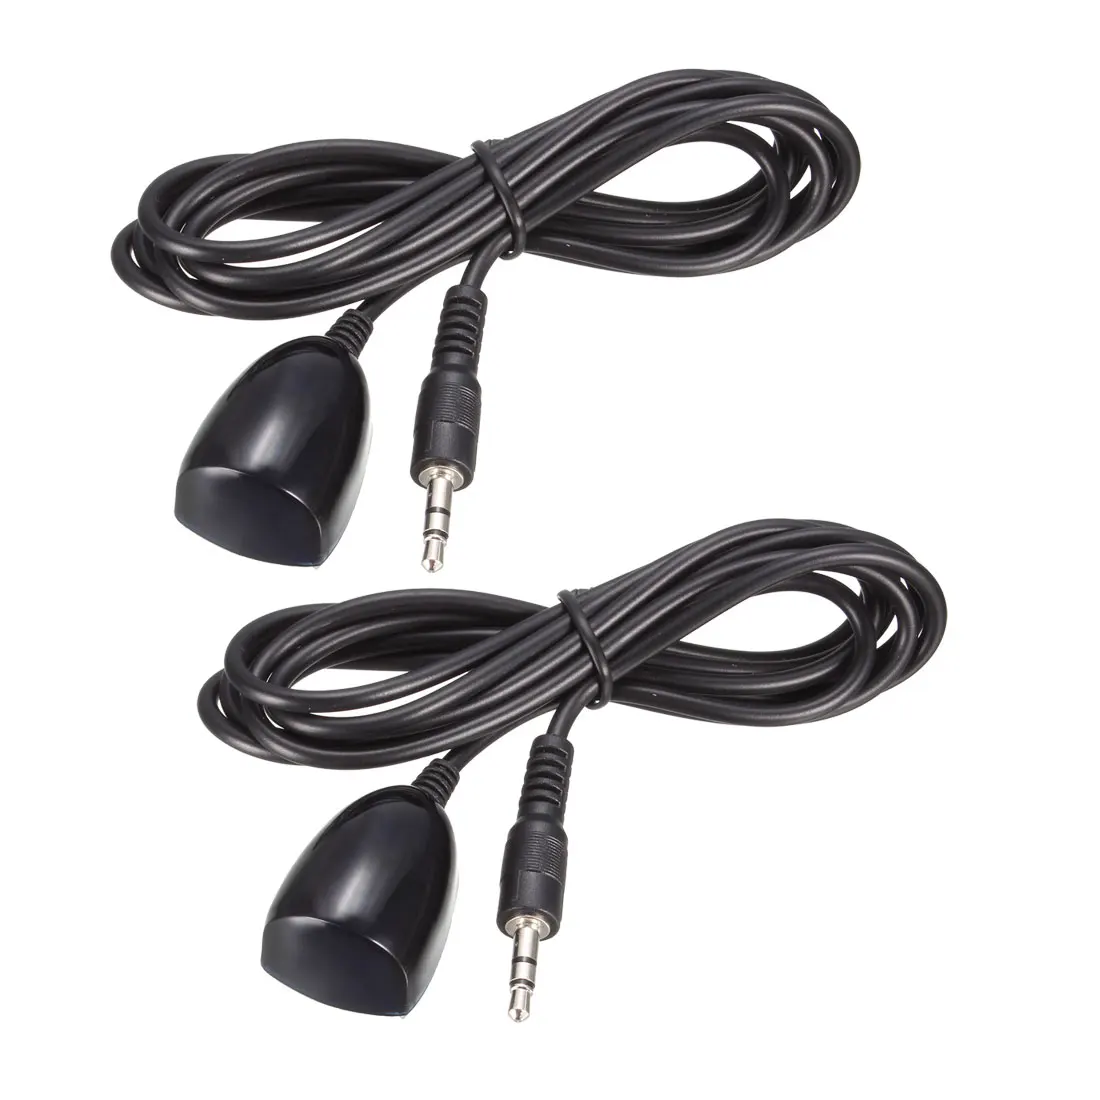 

Uxcell 2pcs IR Infrared Receiver Extender Cable 3.5mm Jack 4.2 Feet Long 26-39ft Receiving Distance Black Head